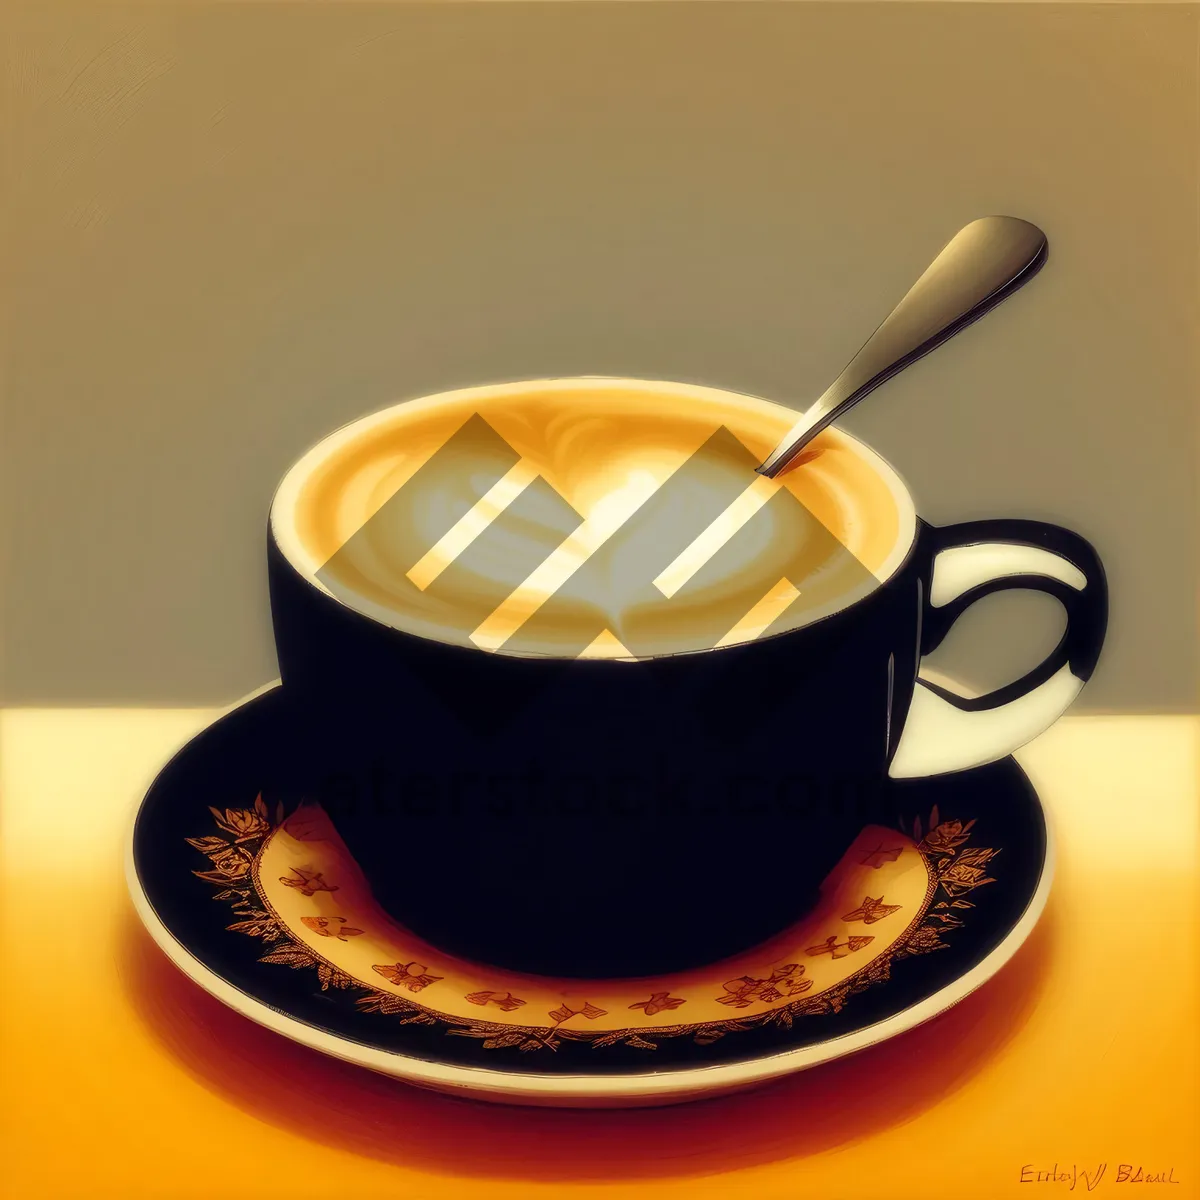 Picture of Morning Brew - A Cup of Aromatic Espresso